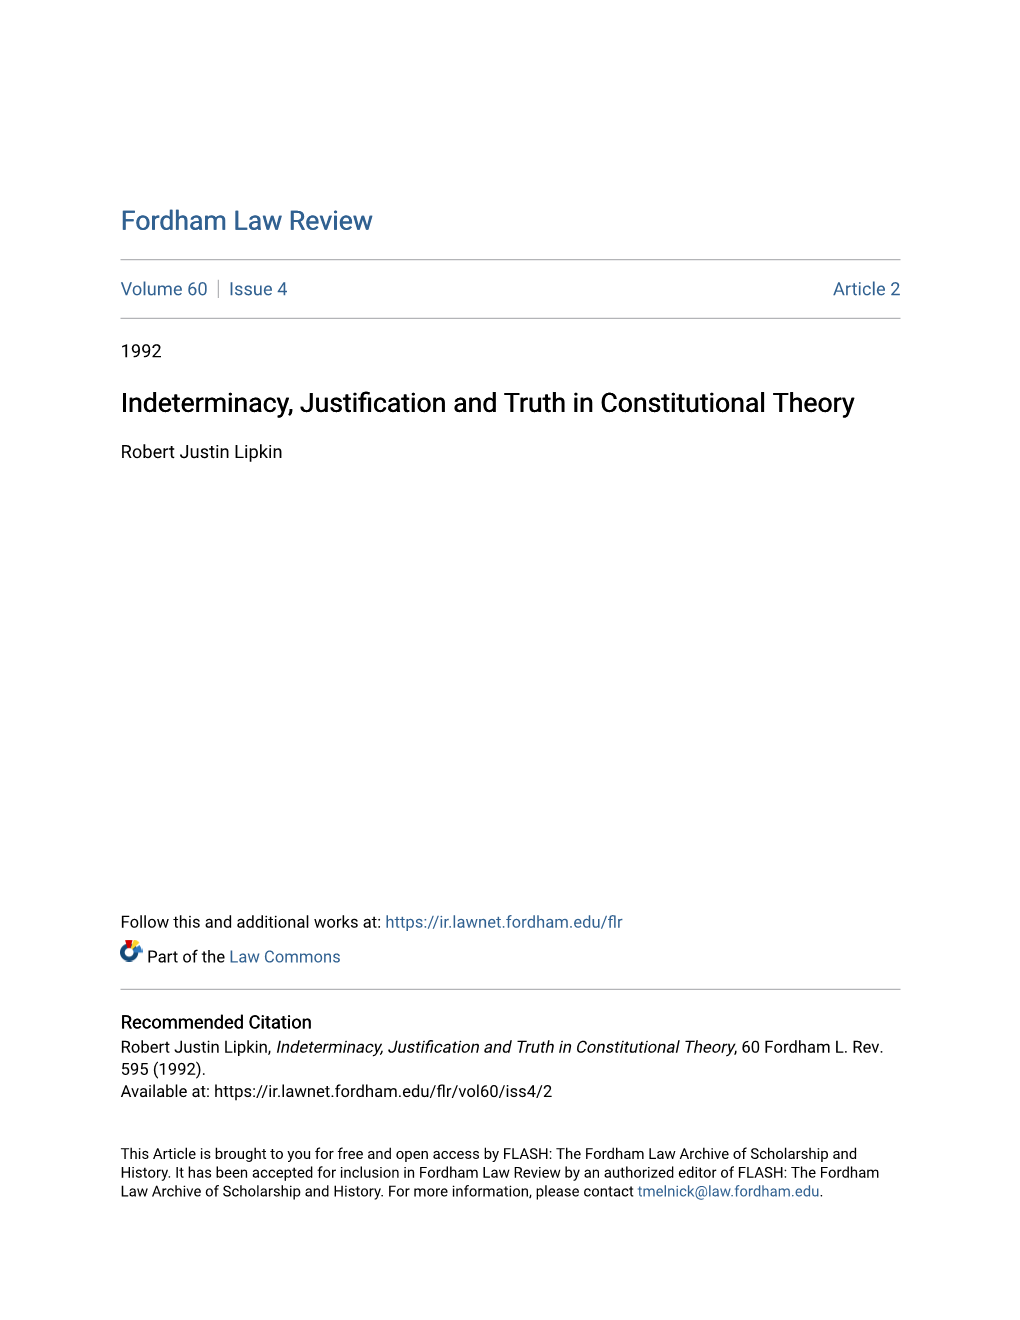 Indeterminacy, Justification and Truth in Constitutional Theory